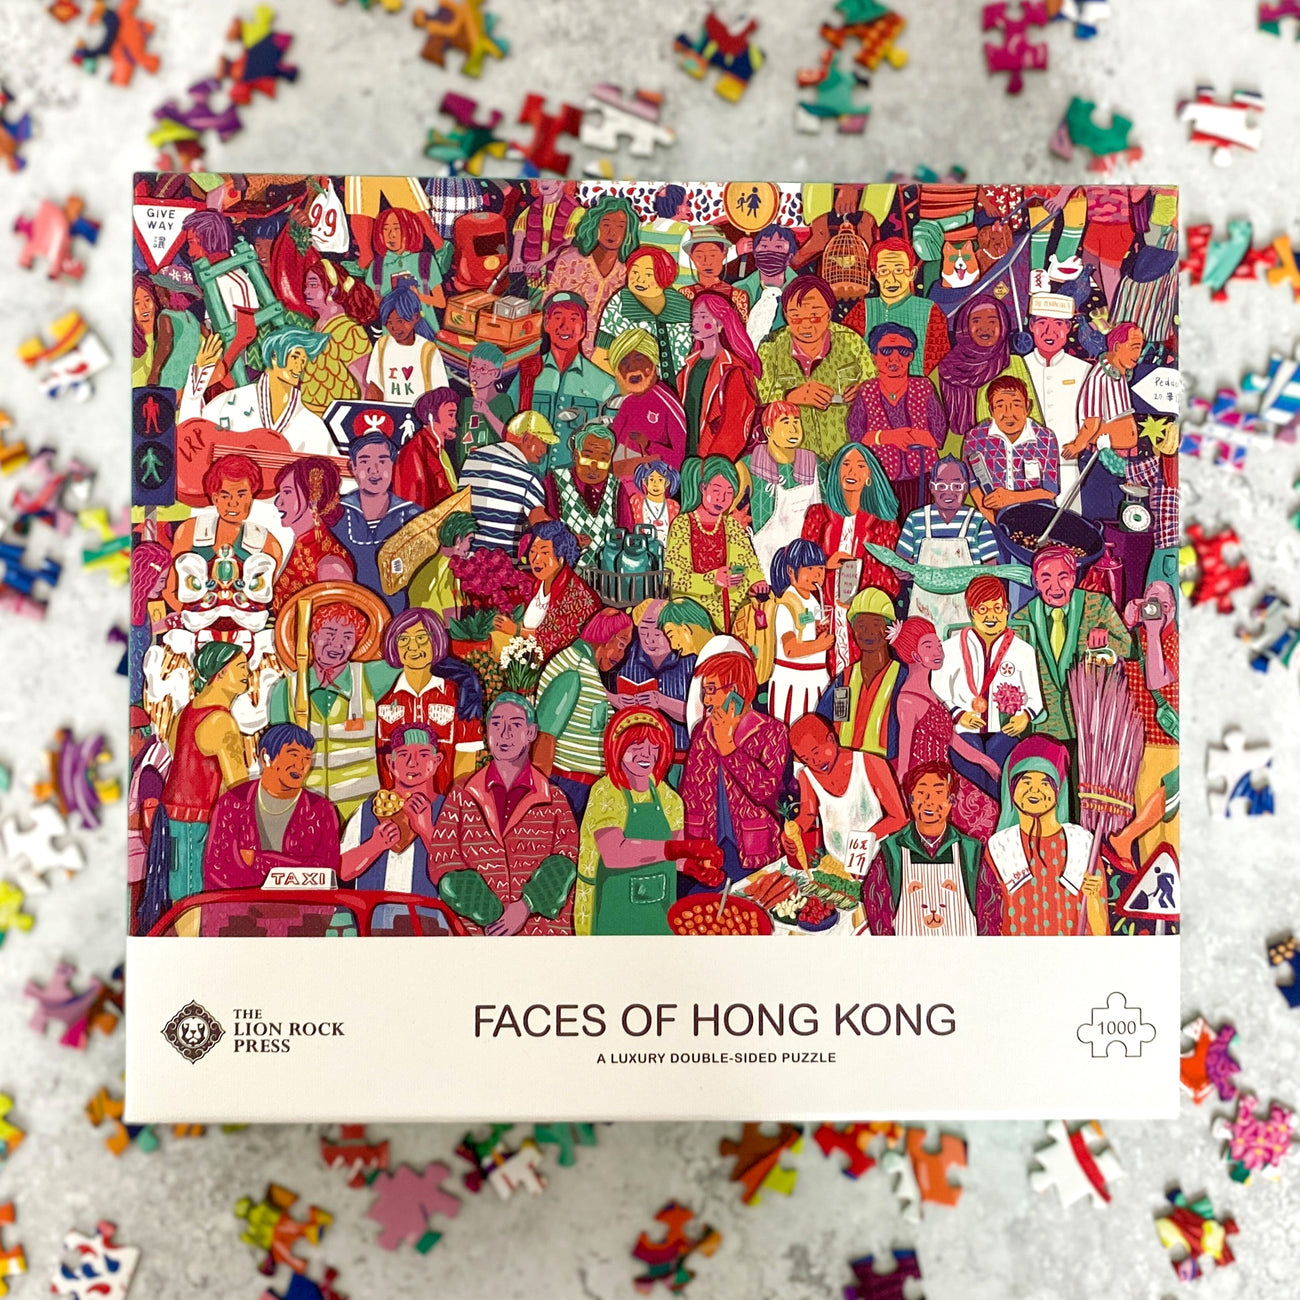 Faces of Hong Kong Double-sided 1000-pc Puzzle by Lion Rock Press